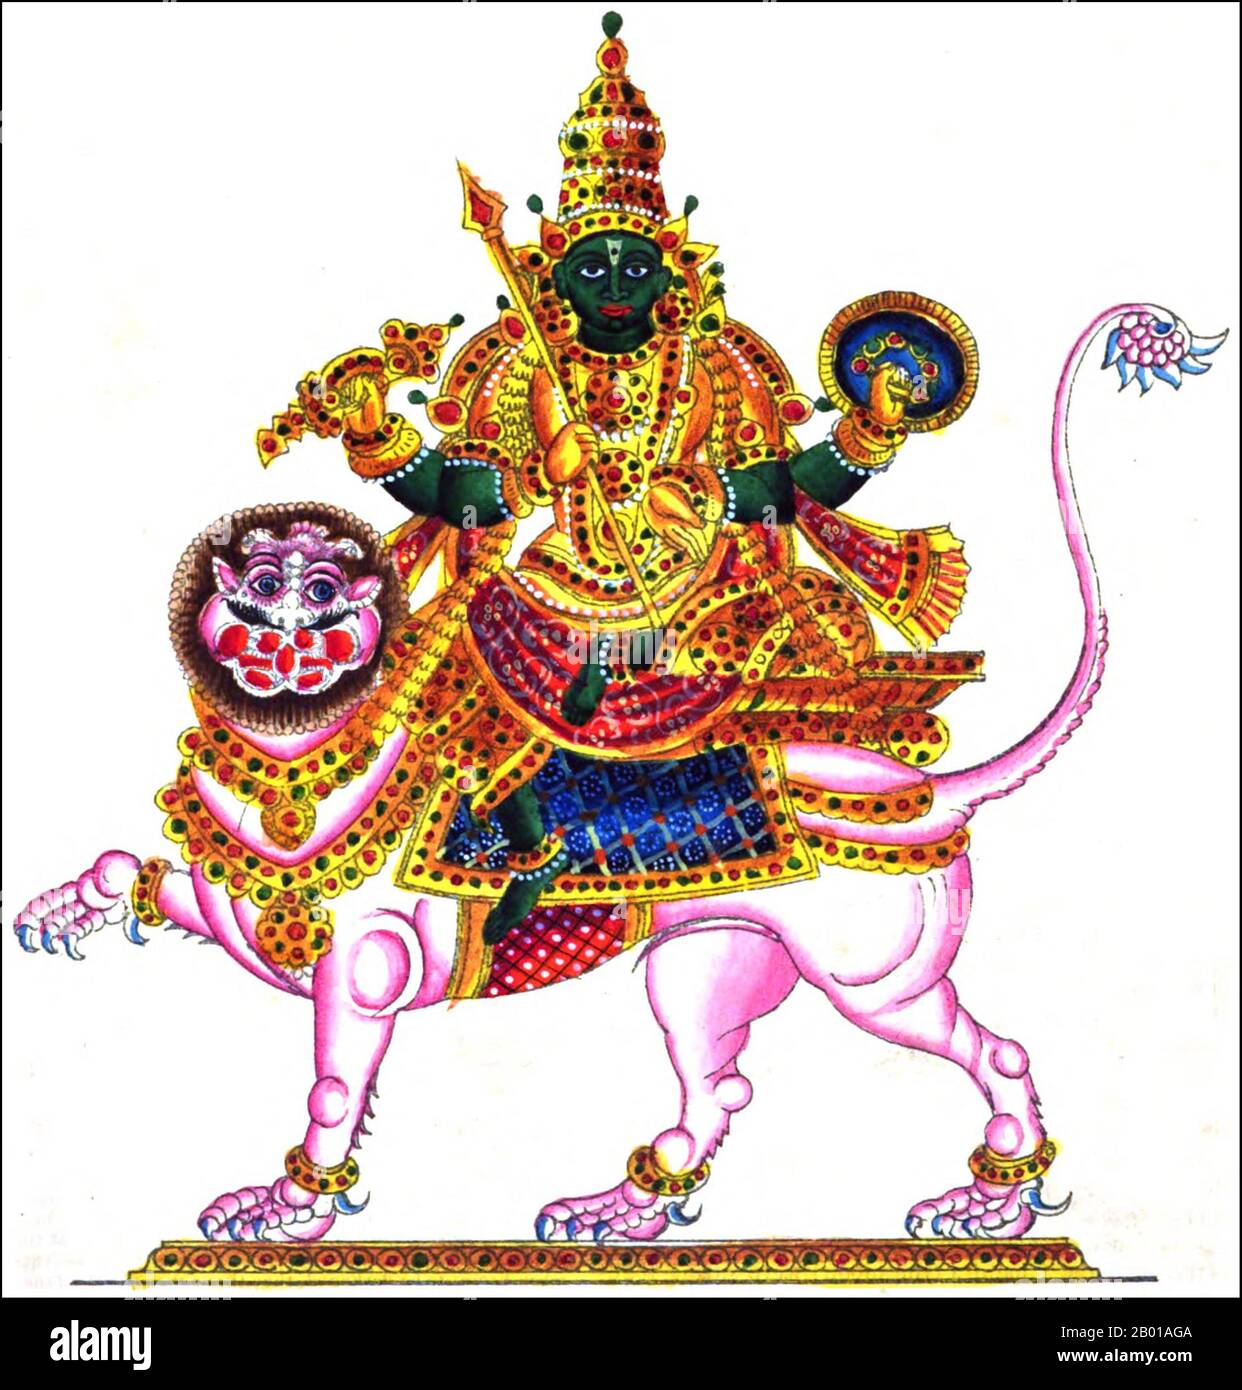 India: An Indian representation of Rahu, Snake Demon and causer of solar and lunar eclipses, 1842.  In Hindu mythology, Rahu is a snake that swallows the sun or the moon causing eclipses. He is depicted in art as a dragon with no body riding a chariot drawn by eight black horses. Rahu is one of the navagrahas (nine planets) in Vedic astrology. The Rahu kala (time of day under the influence of Rahu) is considered inauspicious. Stock Photo